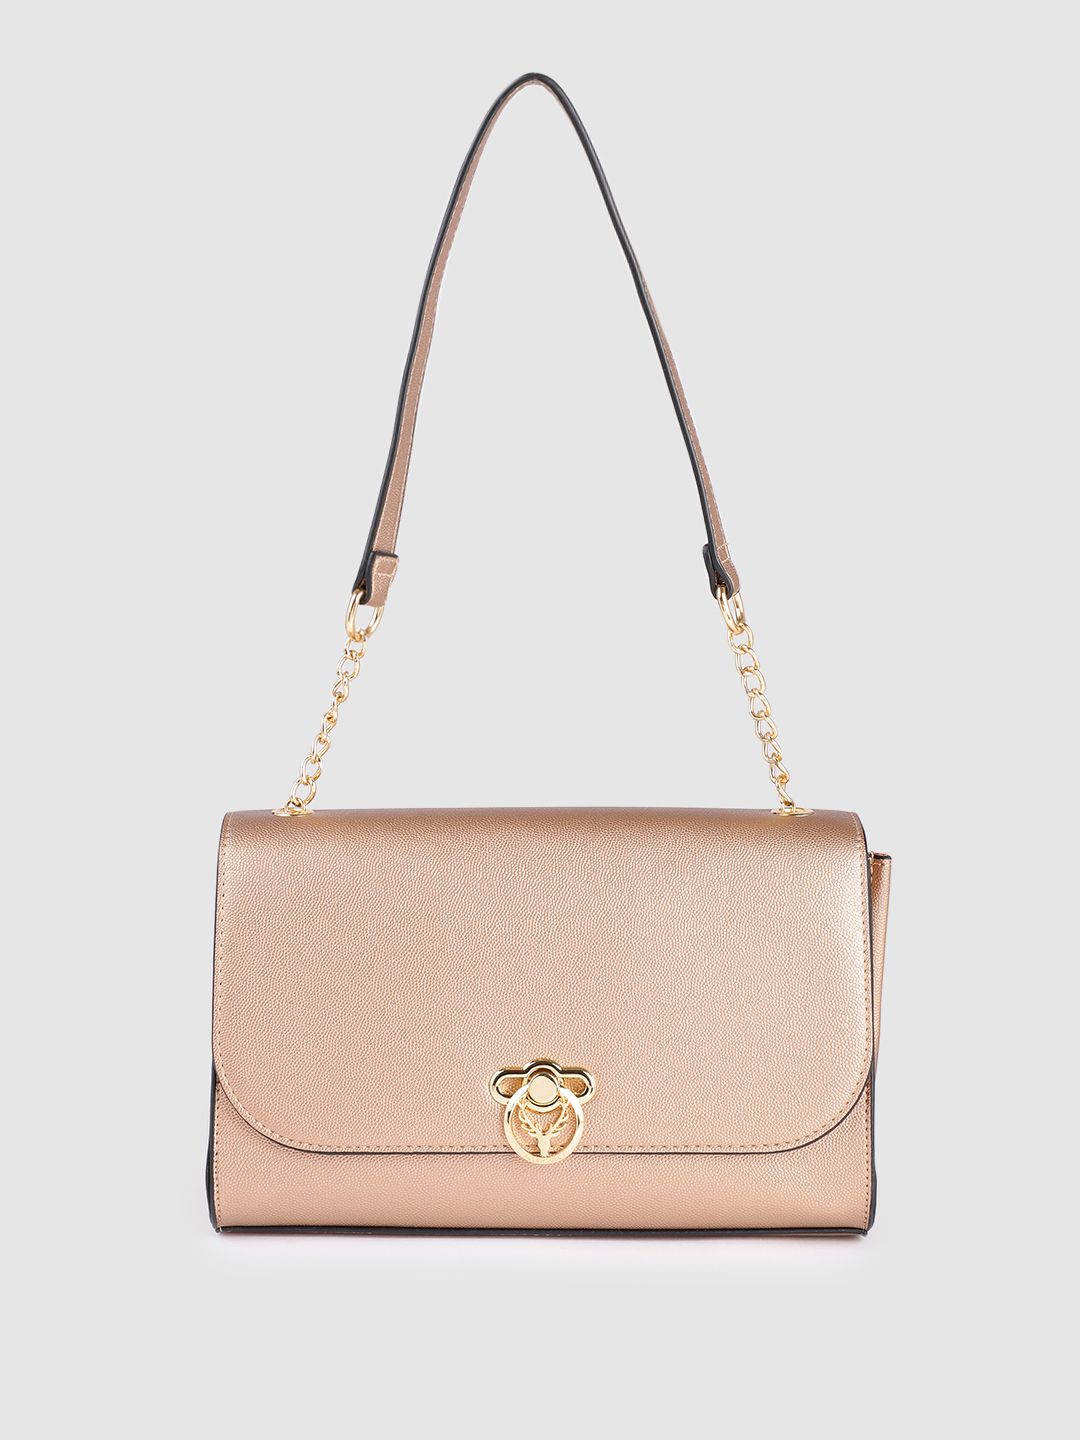 Allen Solly Rose Gold-Toned Solid Structured Sling Bag Price in India